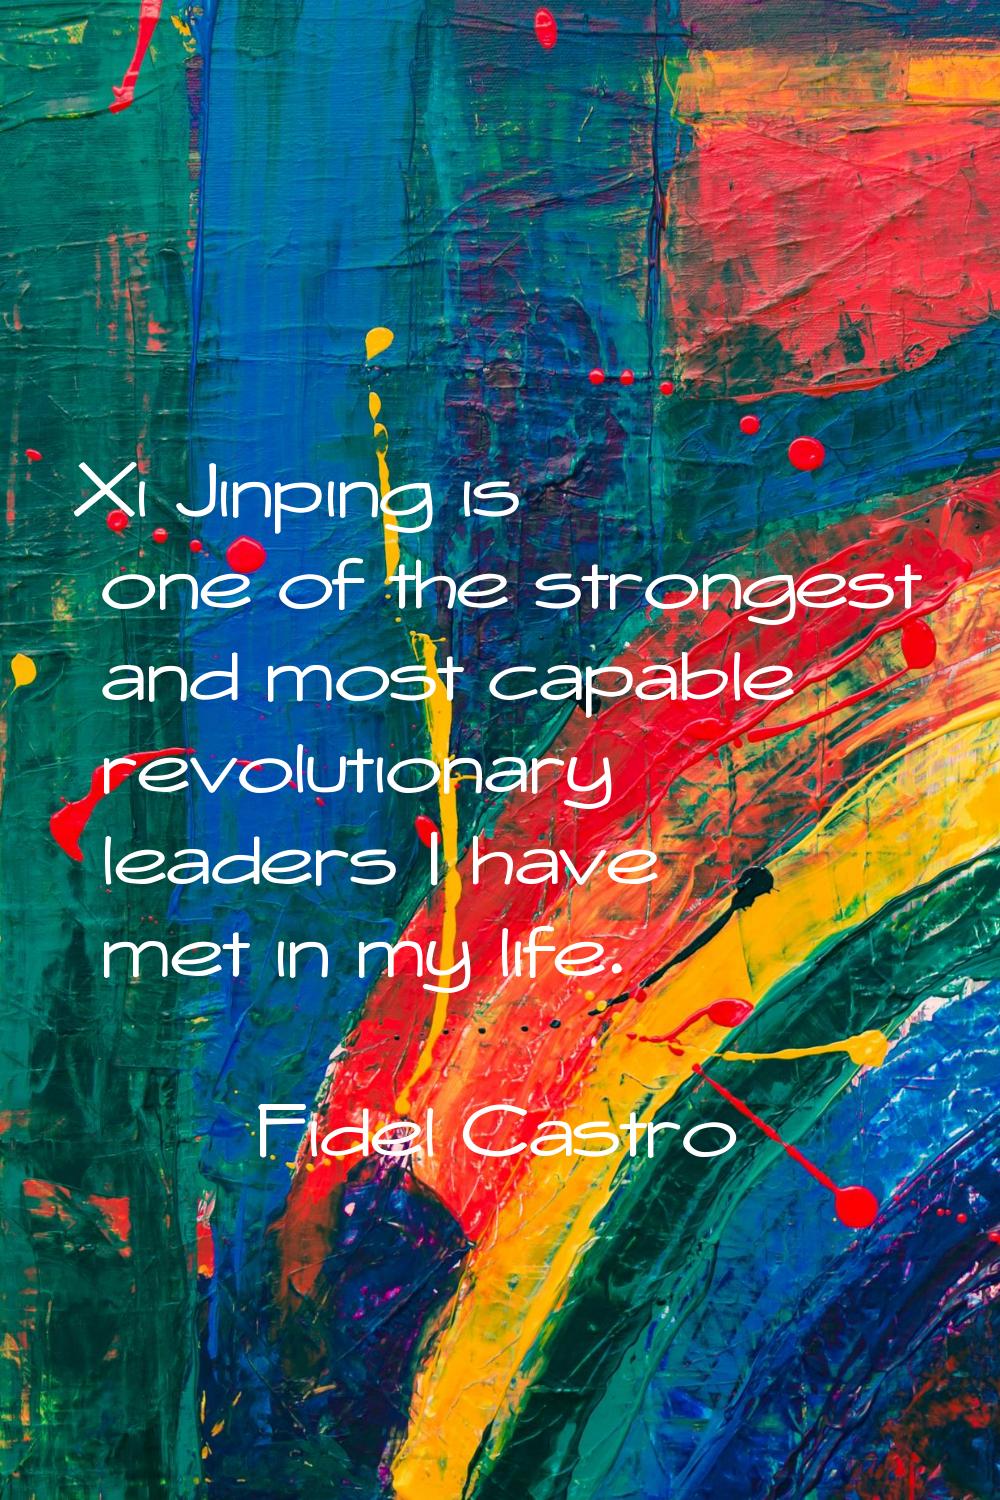 Xi Jinping is one of the strongest and most capable revolutionary leaders I have met in my life.